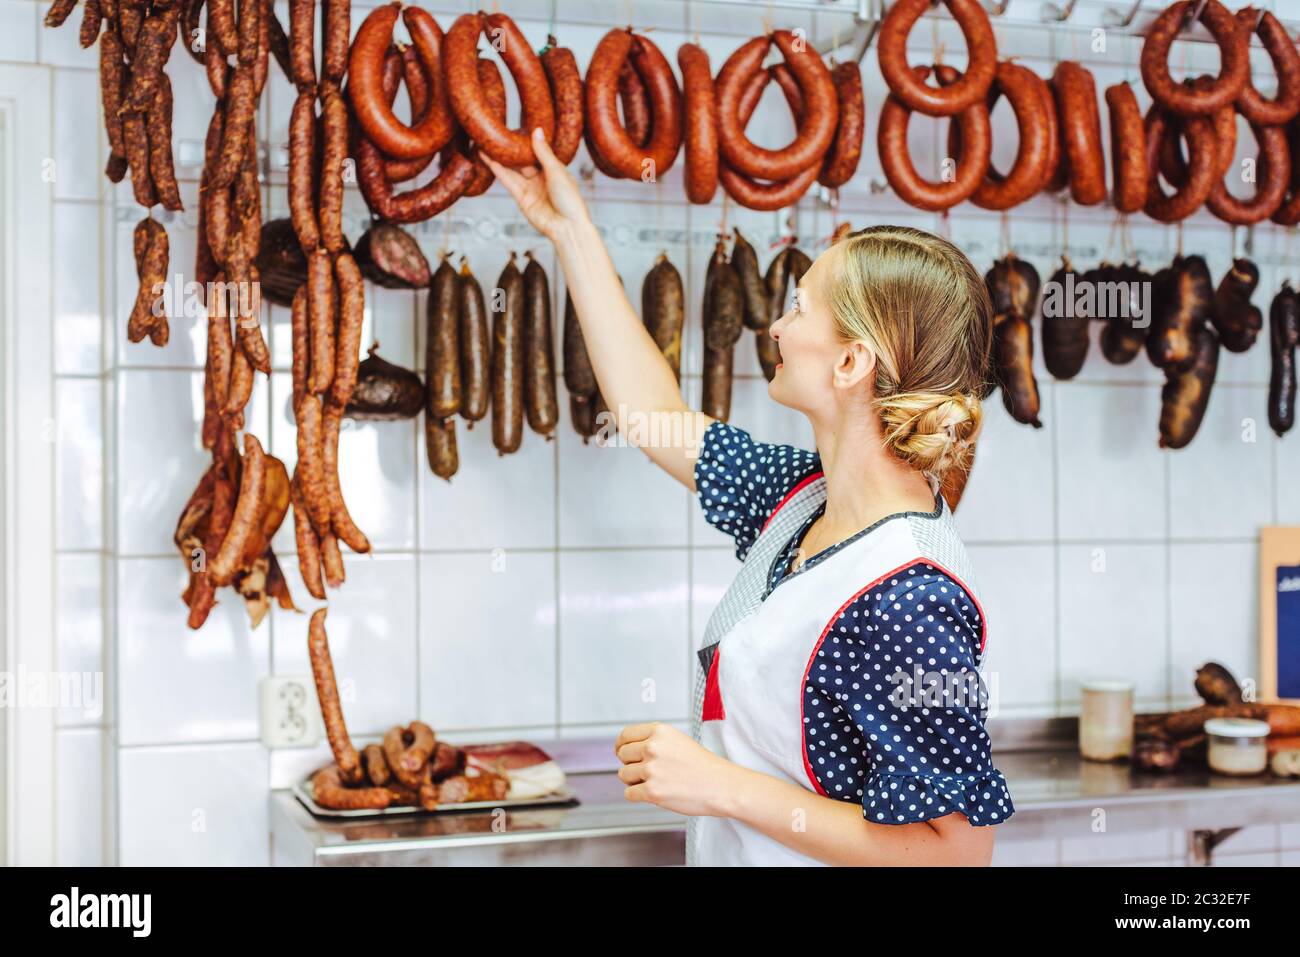 Saleslady getting sausages from the hook in butchery shop ready to sell them Stock Photo